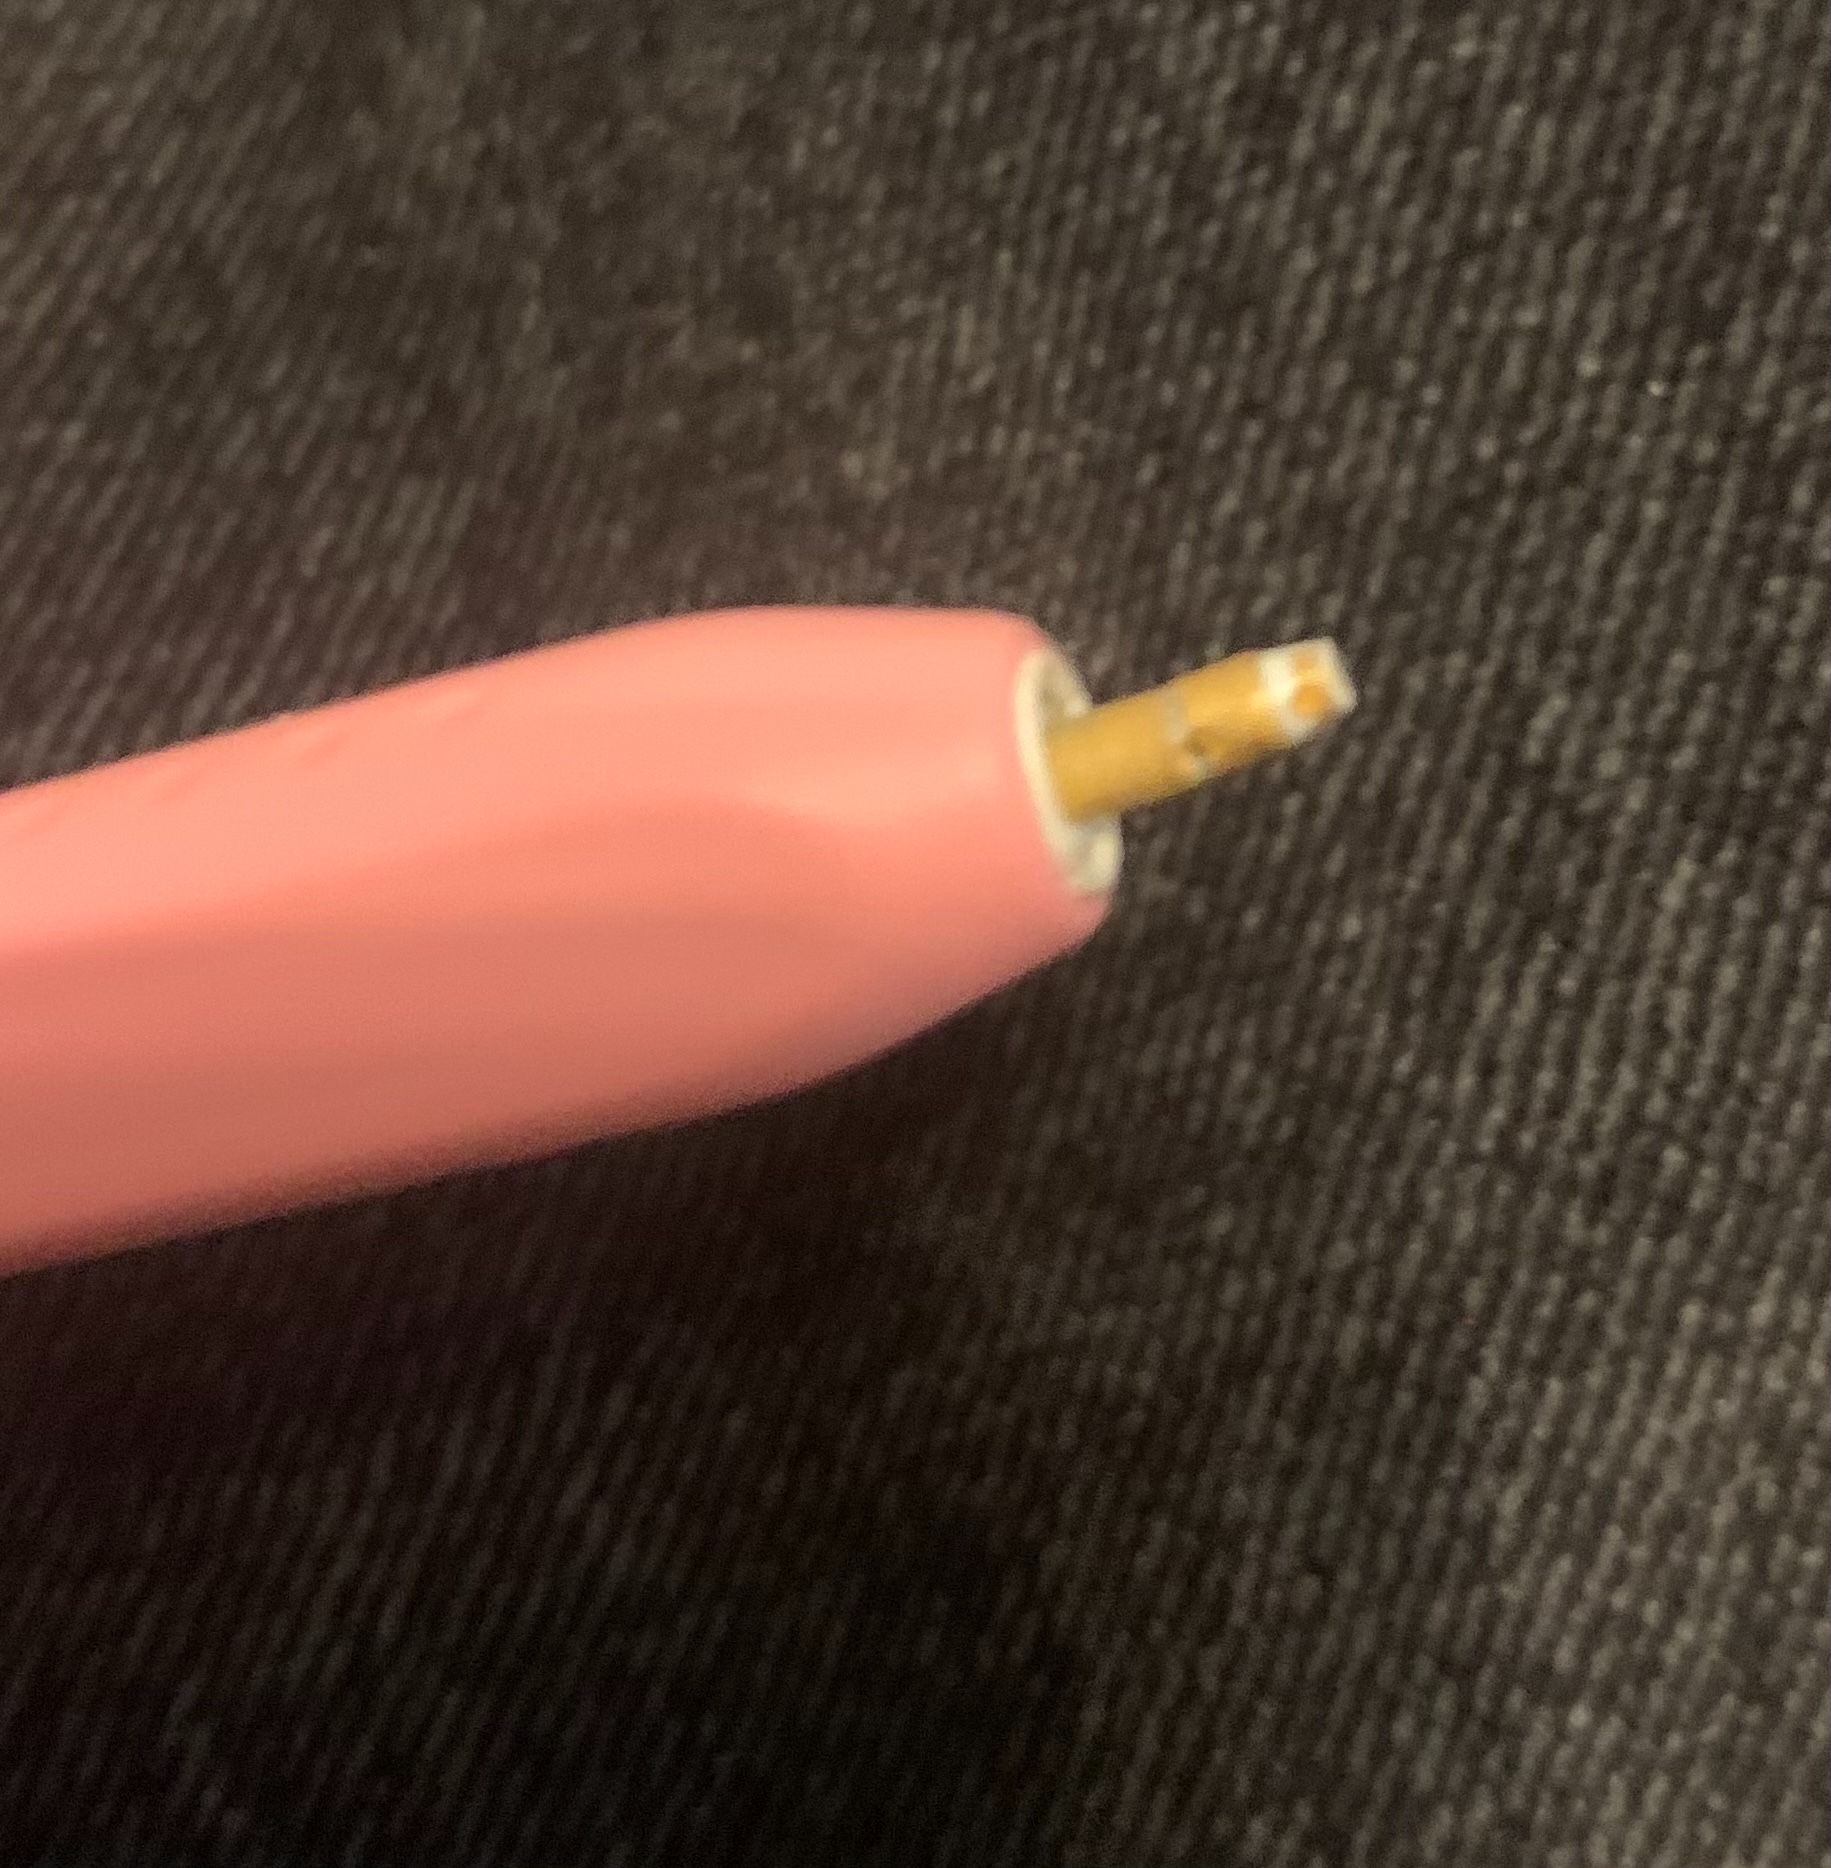 How do I know if my Apple Pencil 2 is damaged?